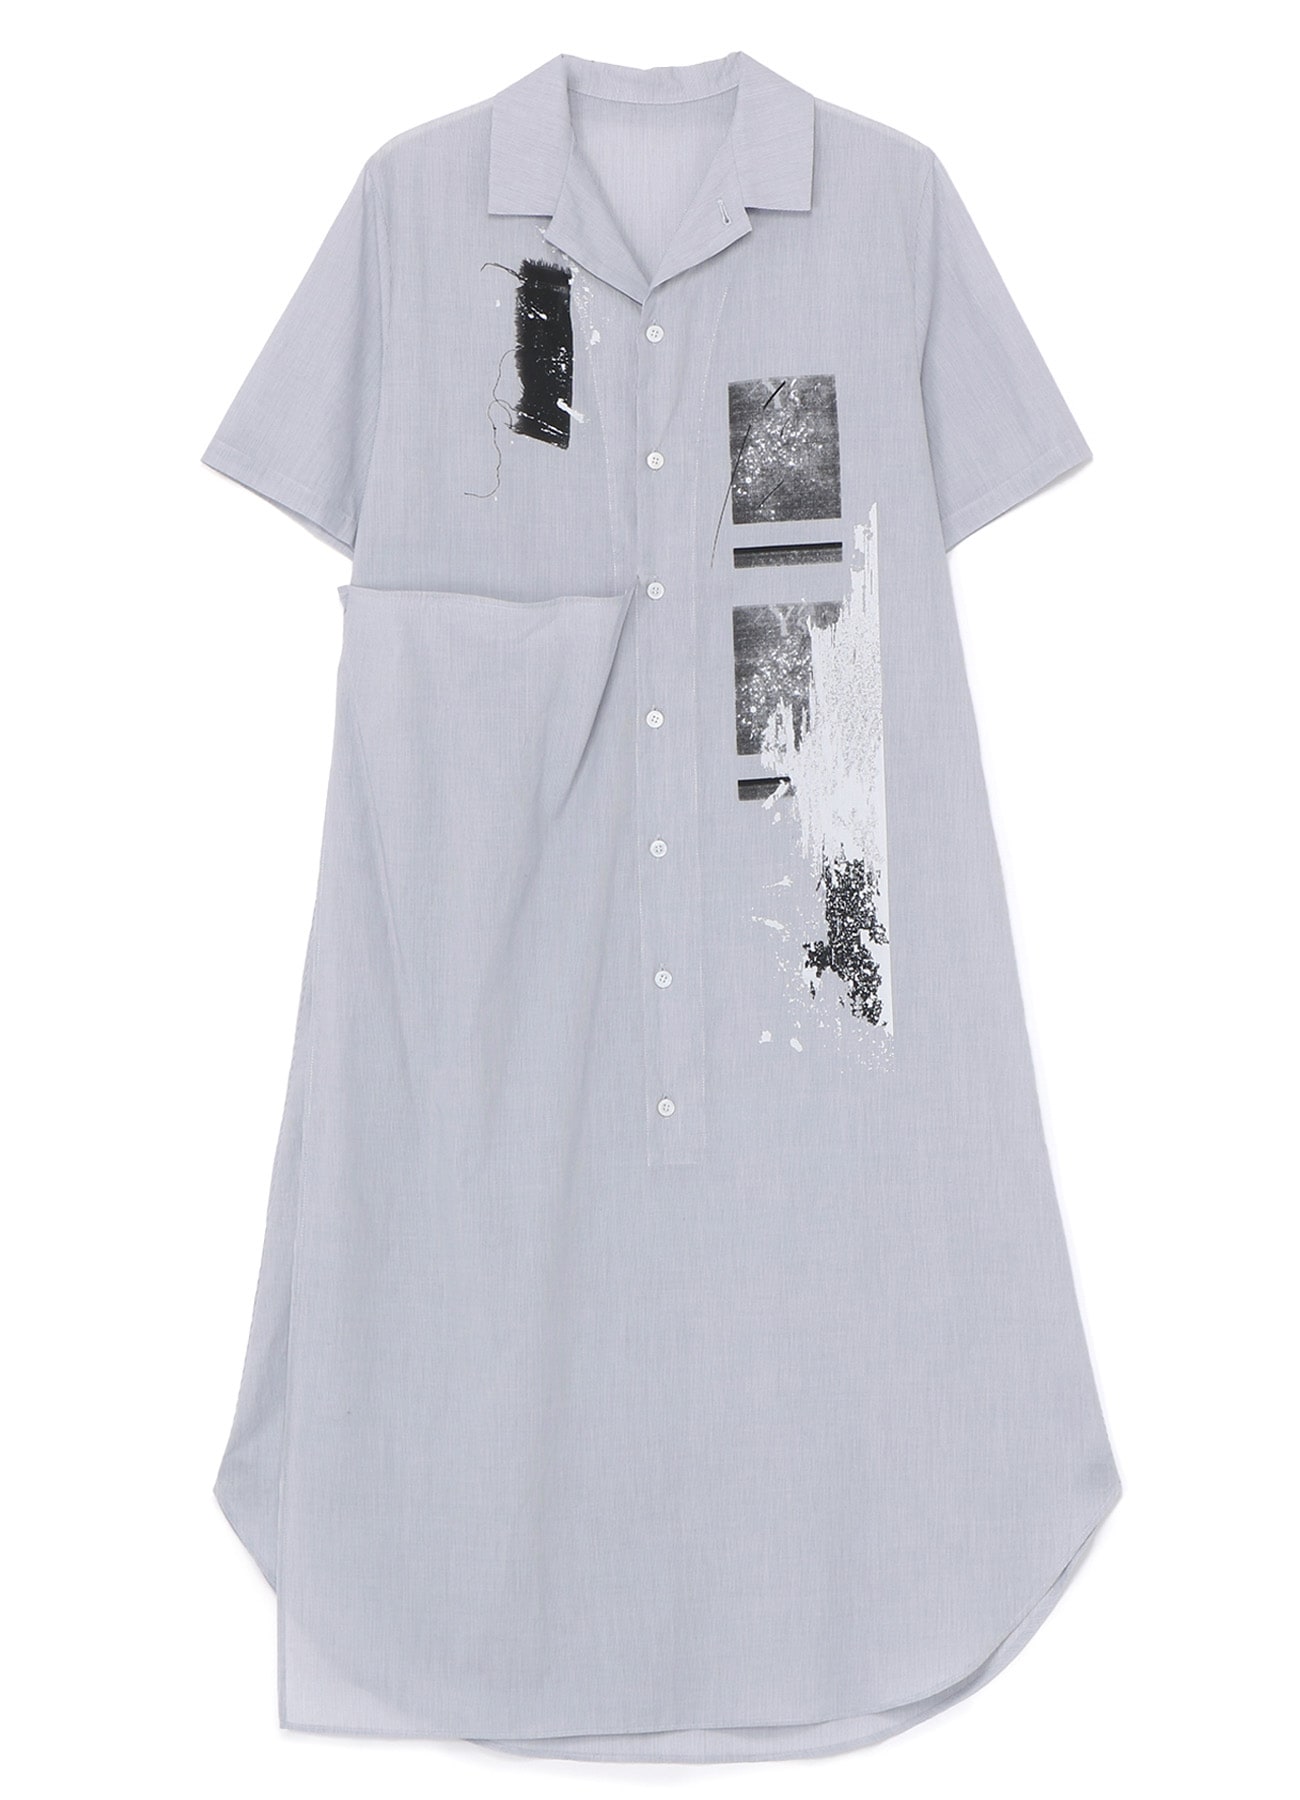 DYED MICRO BROAD Y's COLLAGE PRINT FRONT DRAPE SHORT SLEEVES DRESS